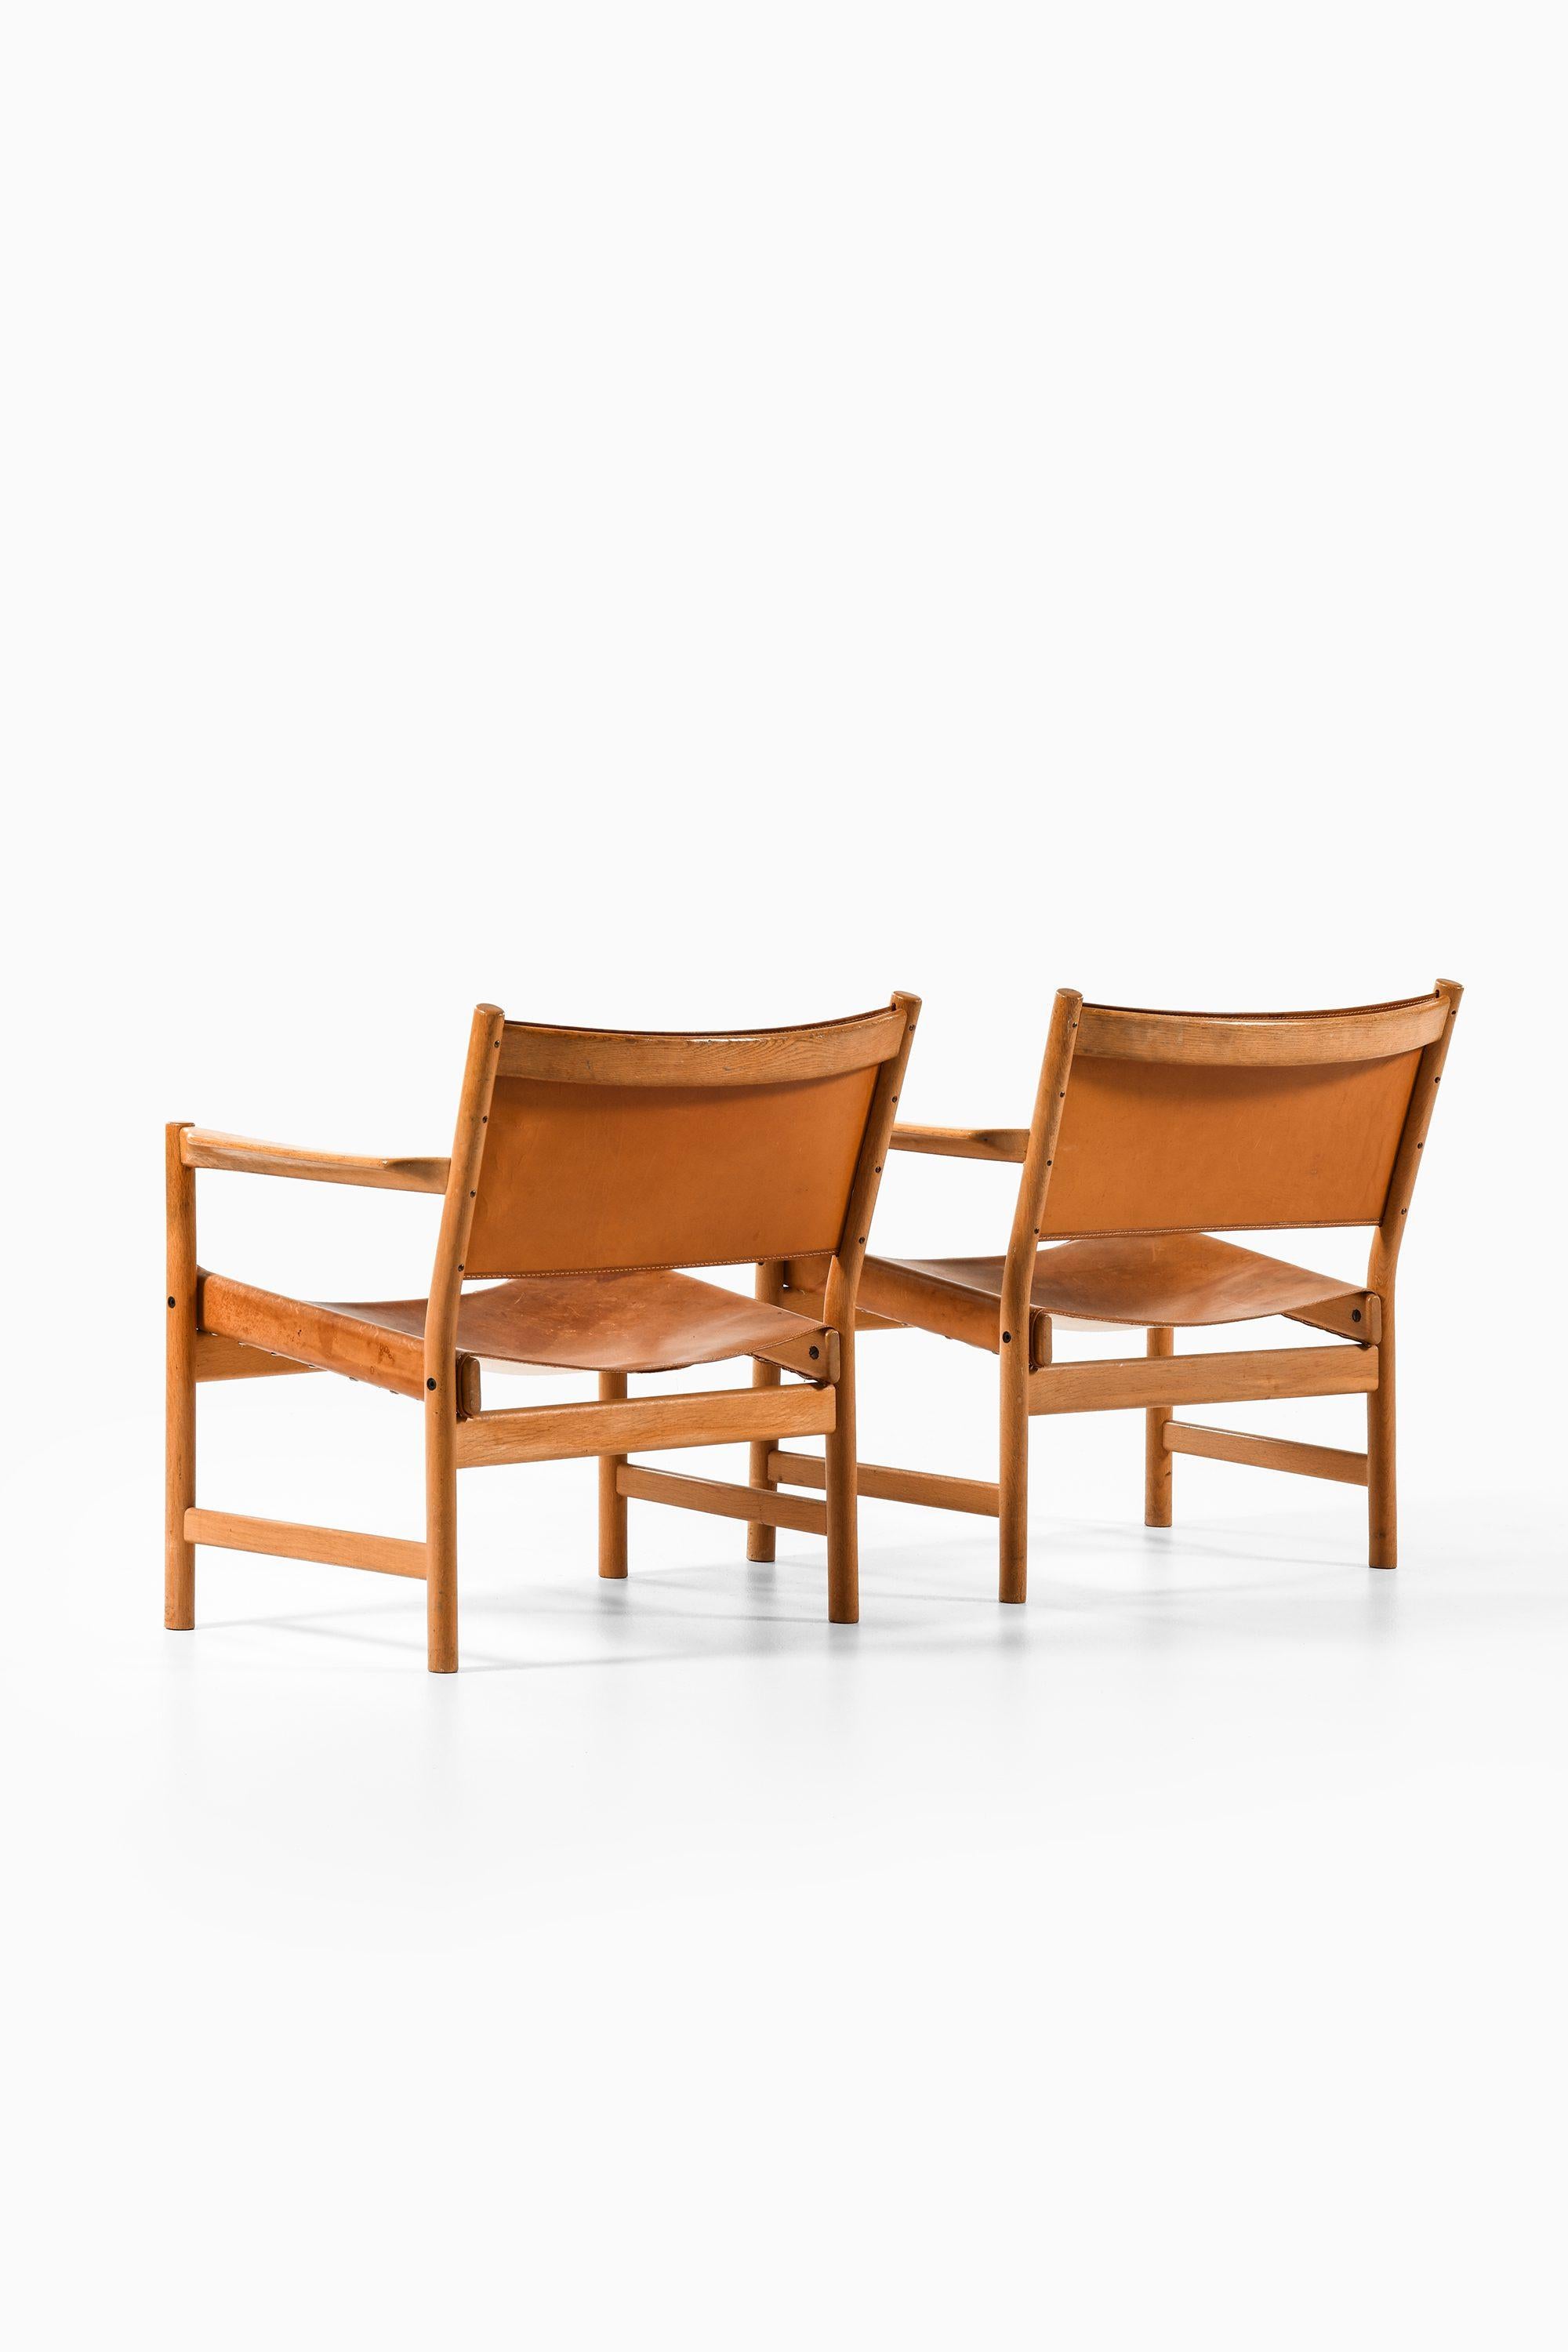 Scandinavian Modern Rare Pair of Easy Chairs in Oak and Leather by Alf Svensson, 1960's For Sale